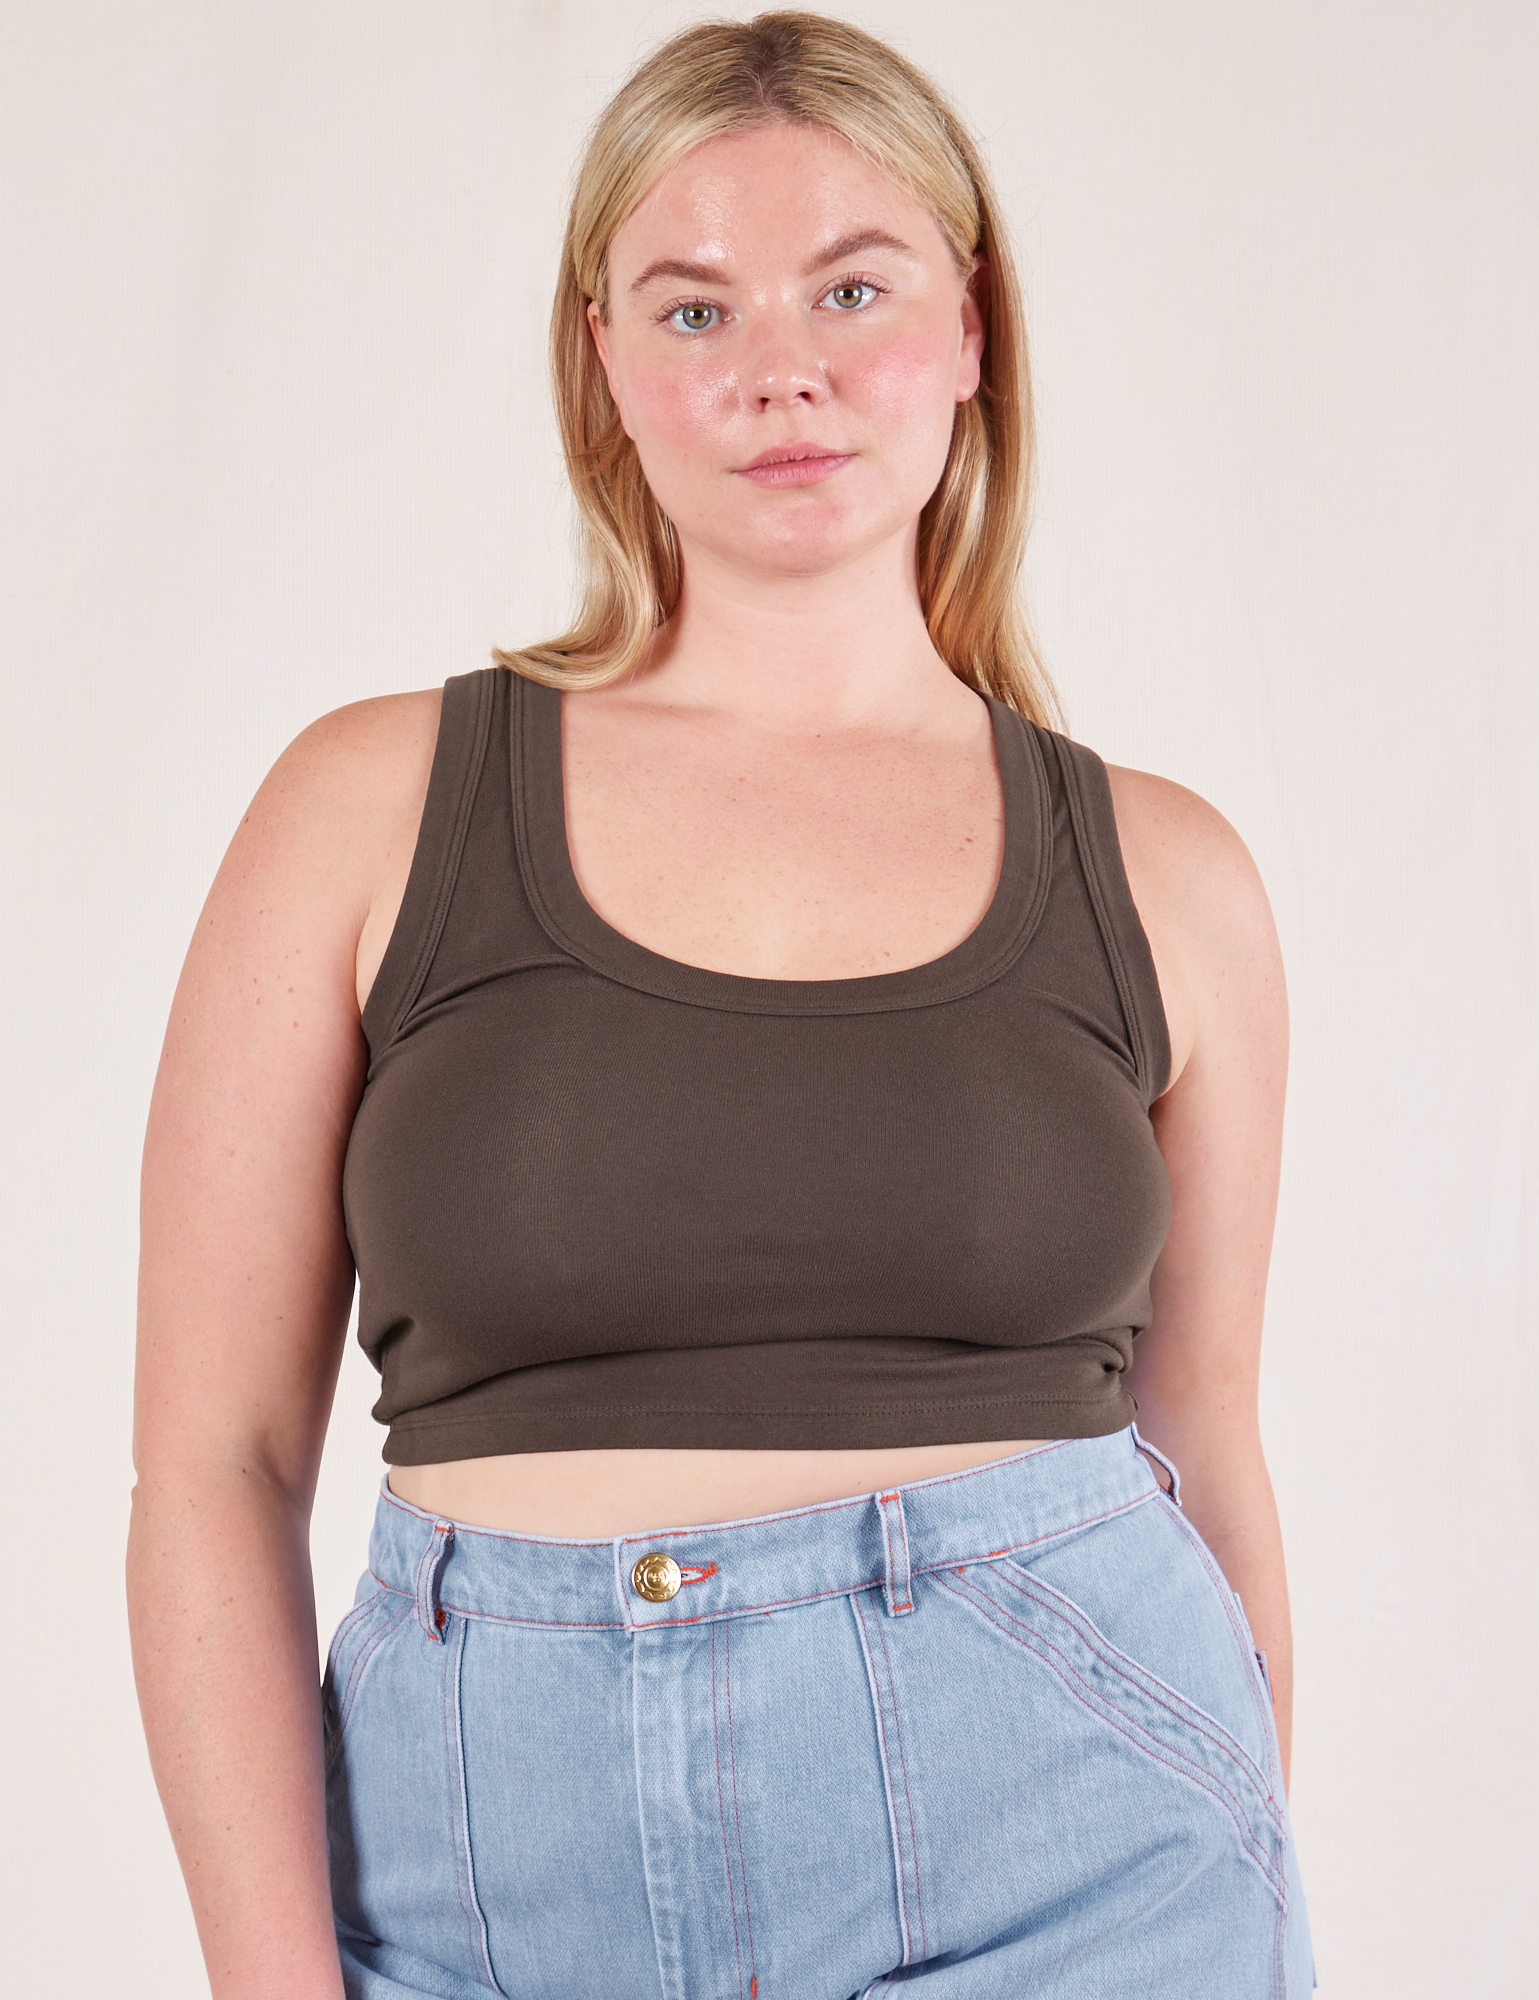 Lish is 5&#39;8&quot; and wearing S Cropped Tank Top in Espresso Brown